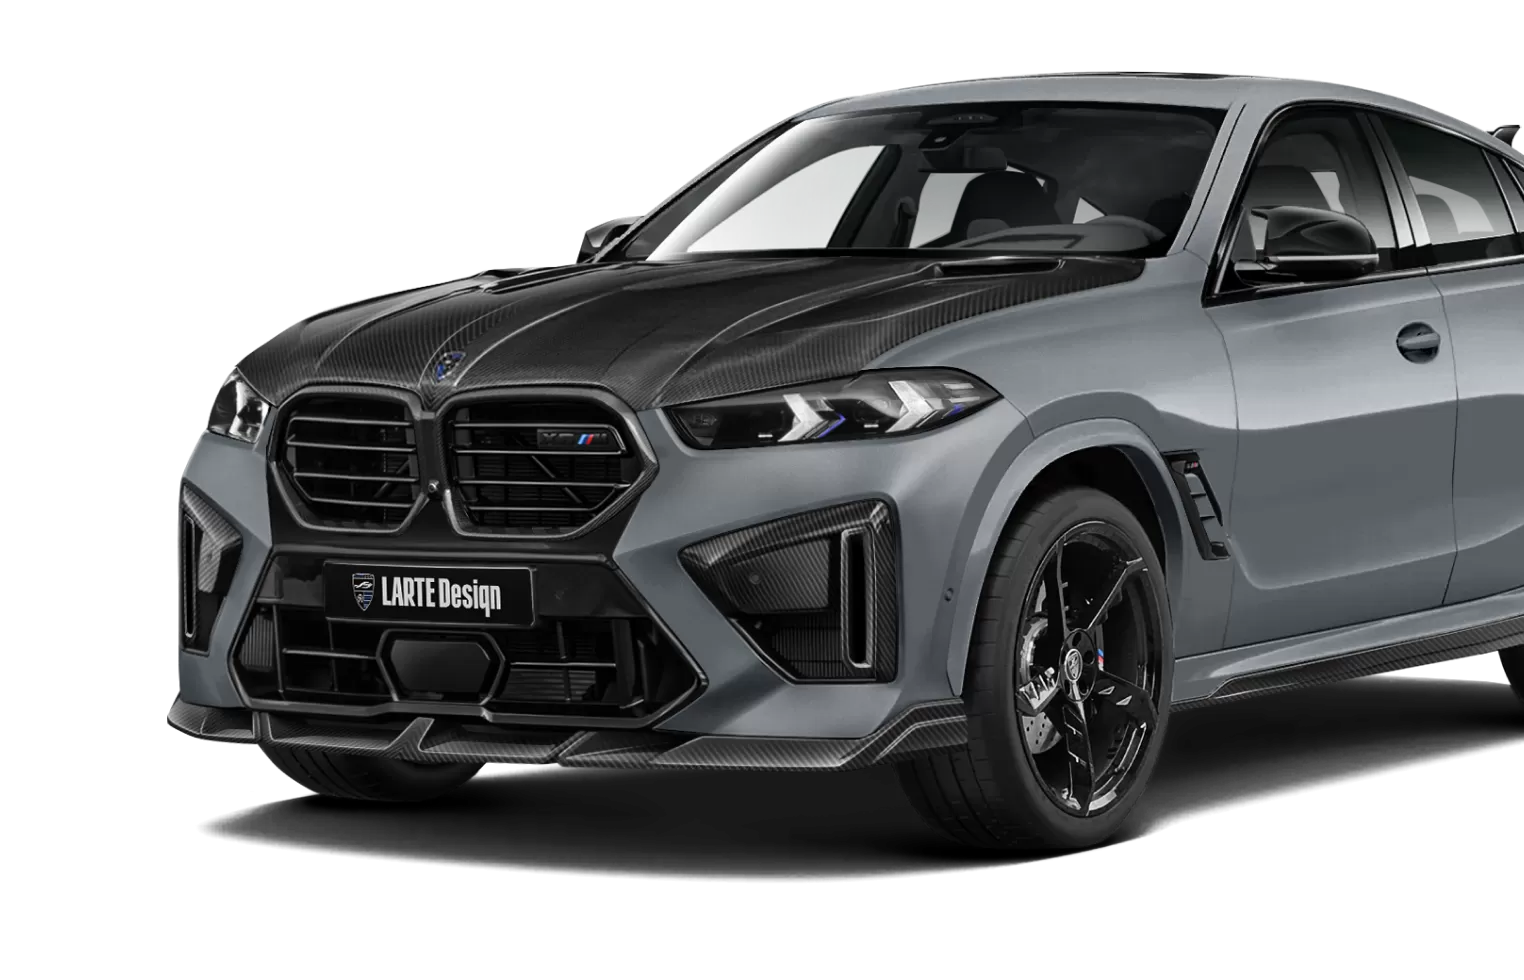 BMW X6M LCI Facelift in Brooklyn Grey color with carbon fiber bidy kit from LARTE Design